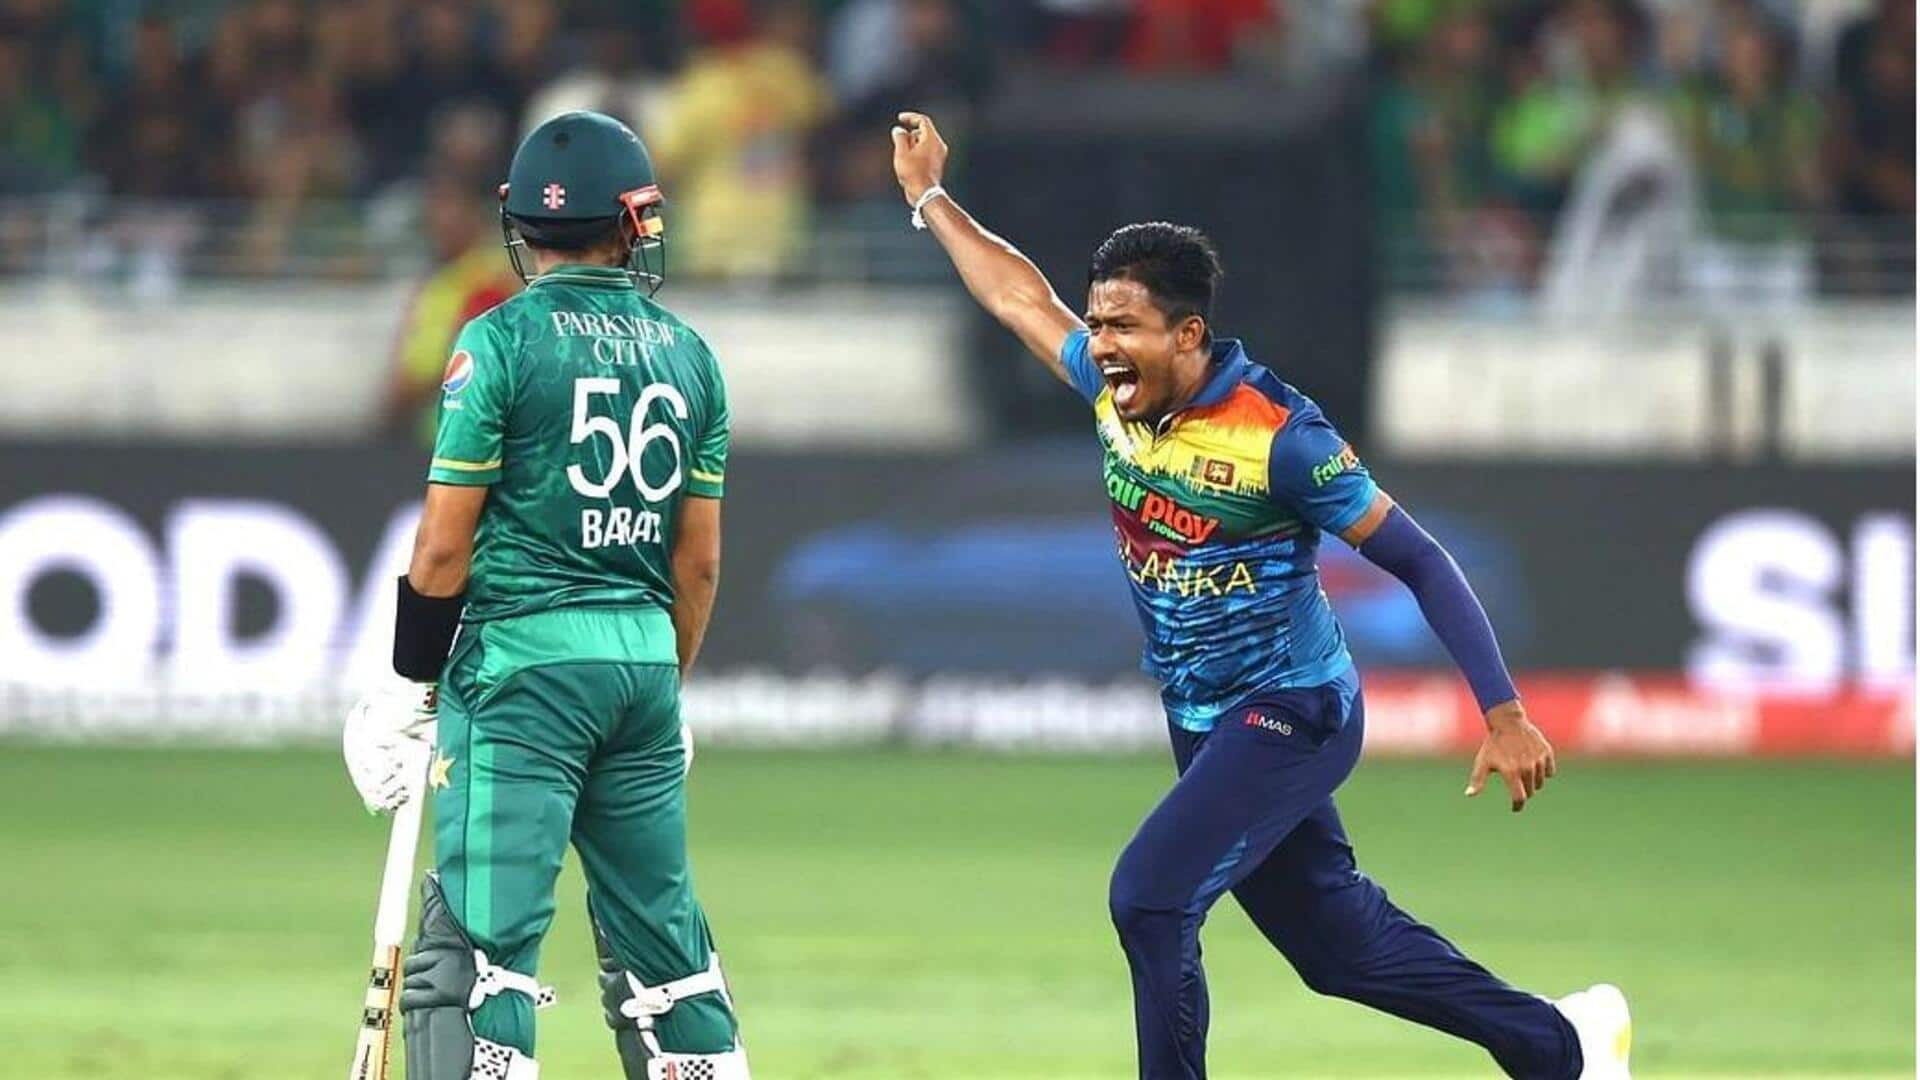 Revisiting iconic World Cup matches between Pakistan and Sri Lanka